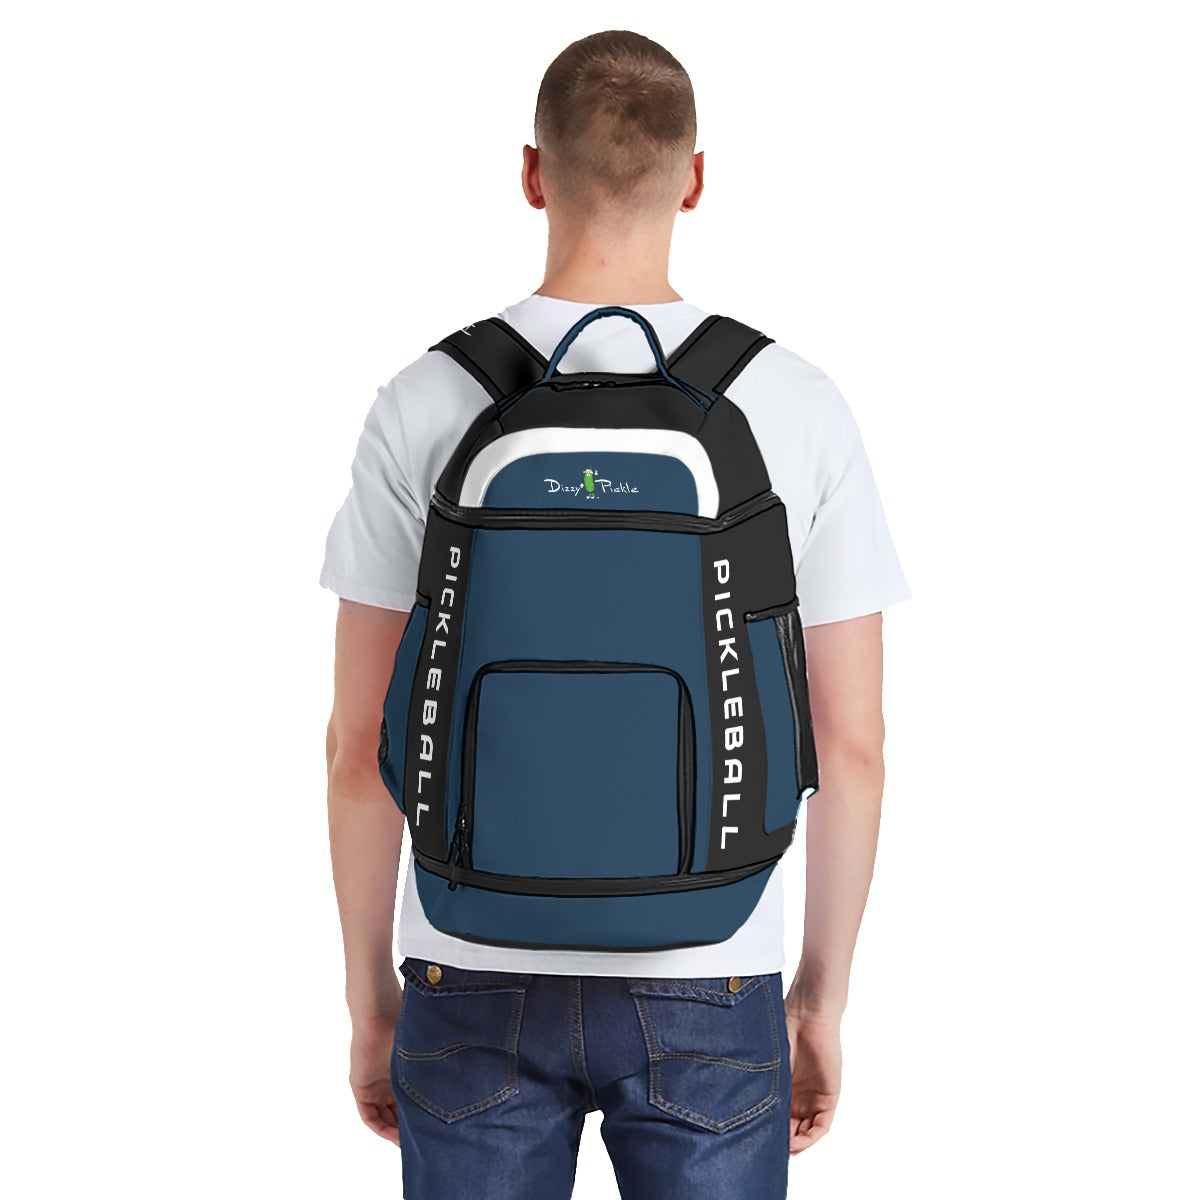 Dizzy Pickle DZY P Classic AK1 Unisex Large Courtside Pickleball Multi-Compartment Backpack with Adjustable Straps